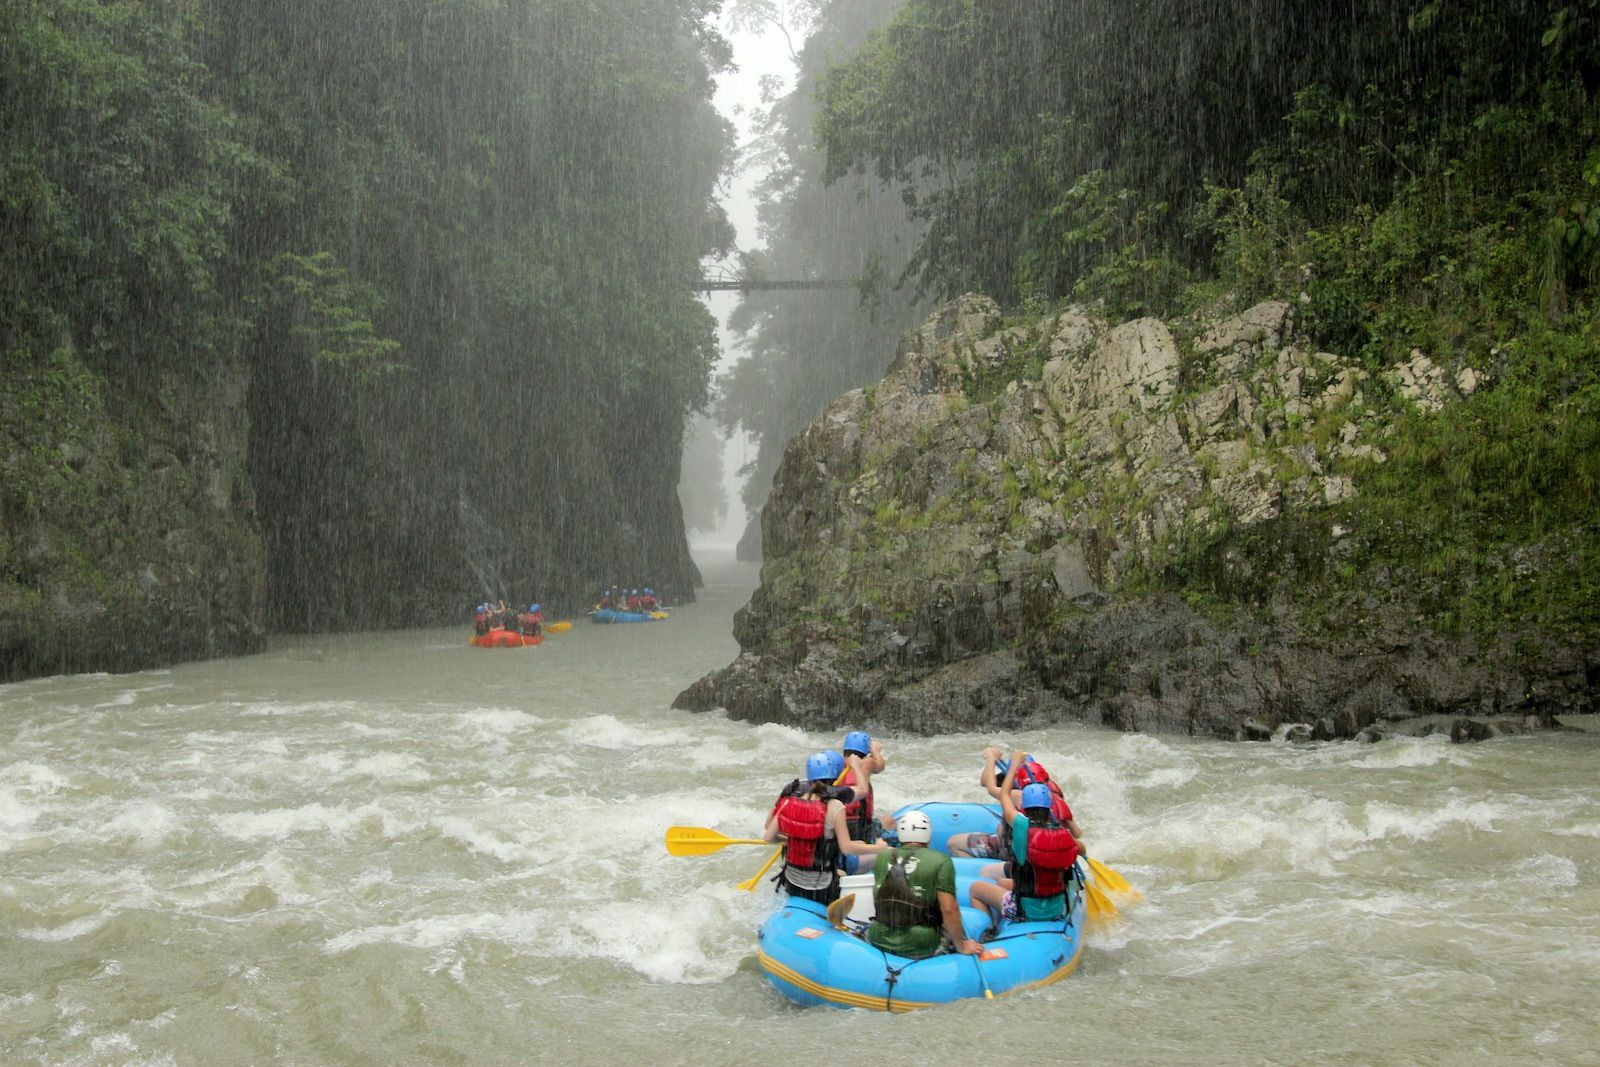 15 amazing experiences to have in Costa Rica before you die